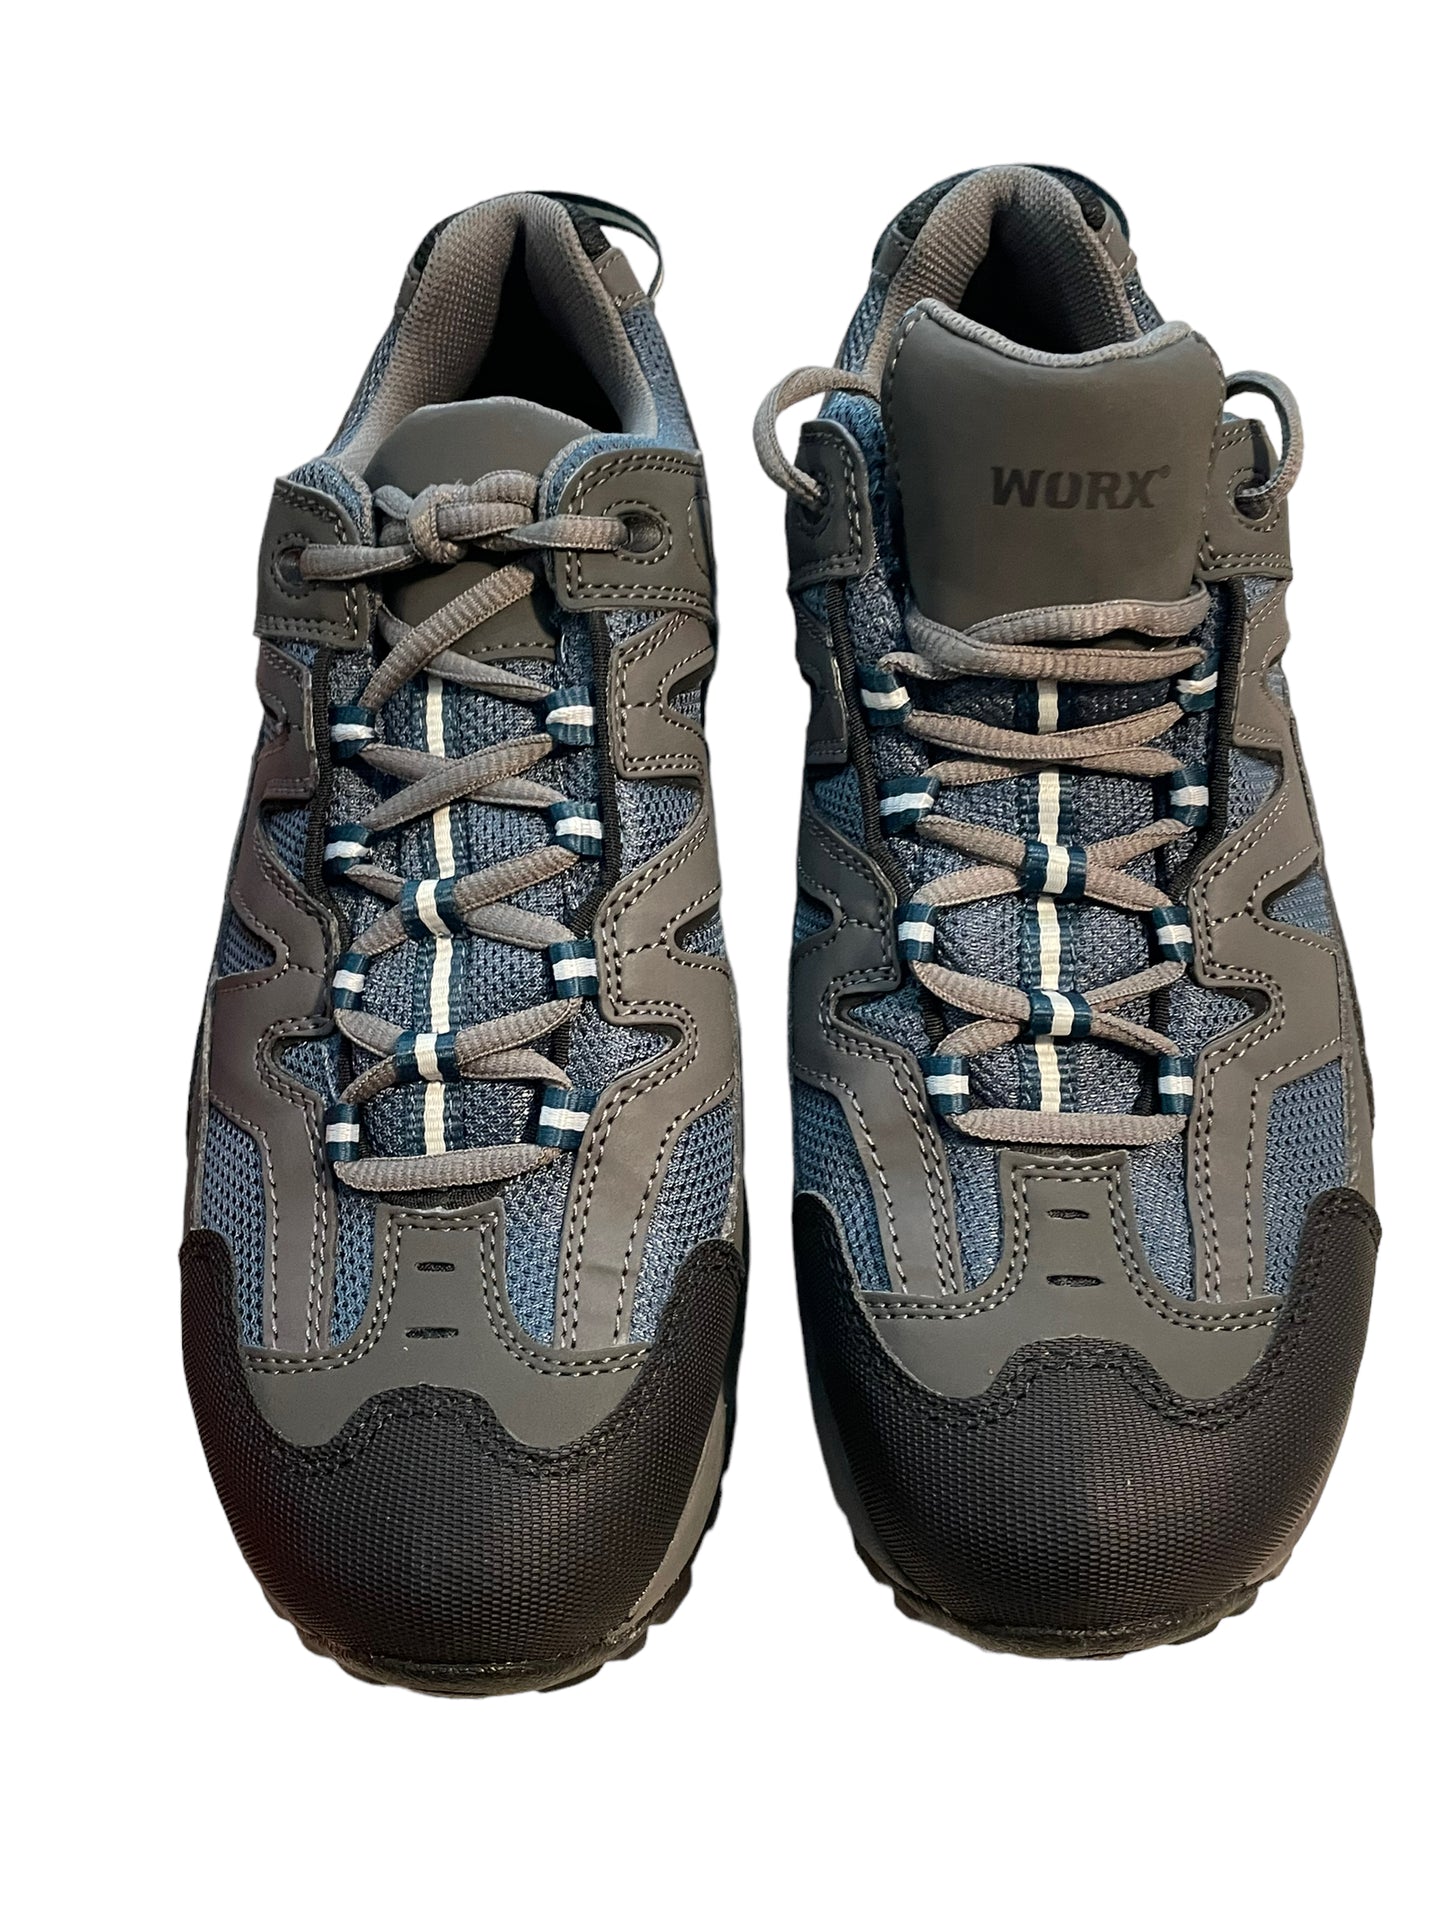 Worx Mens Casual Work Shoes